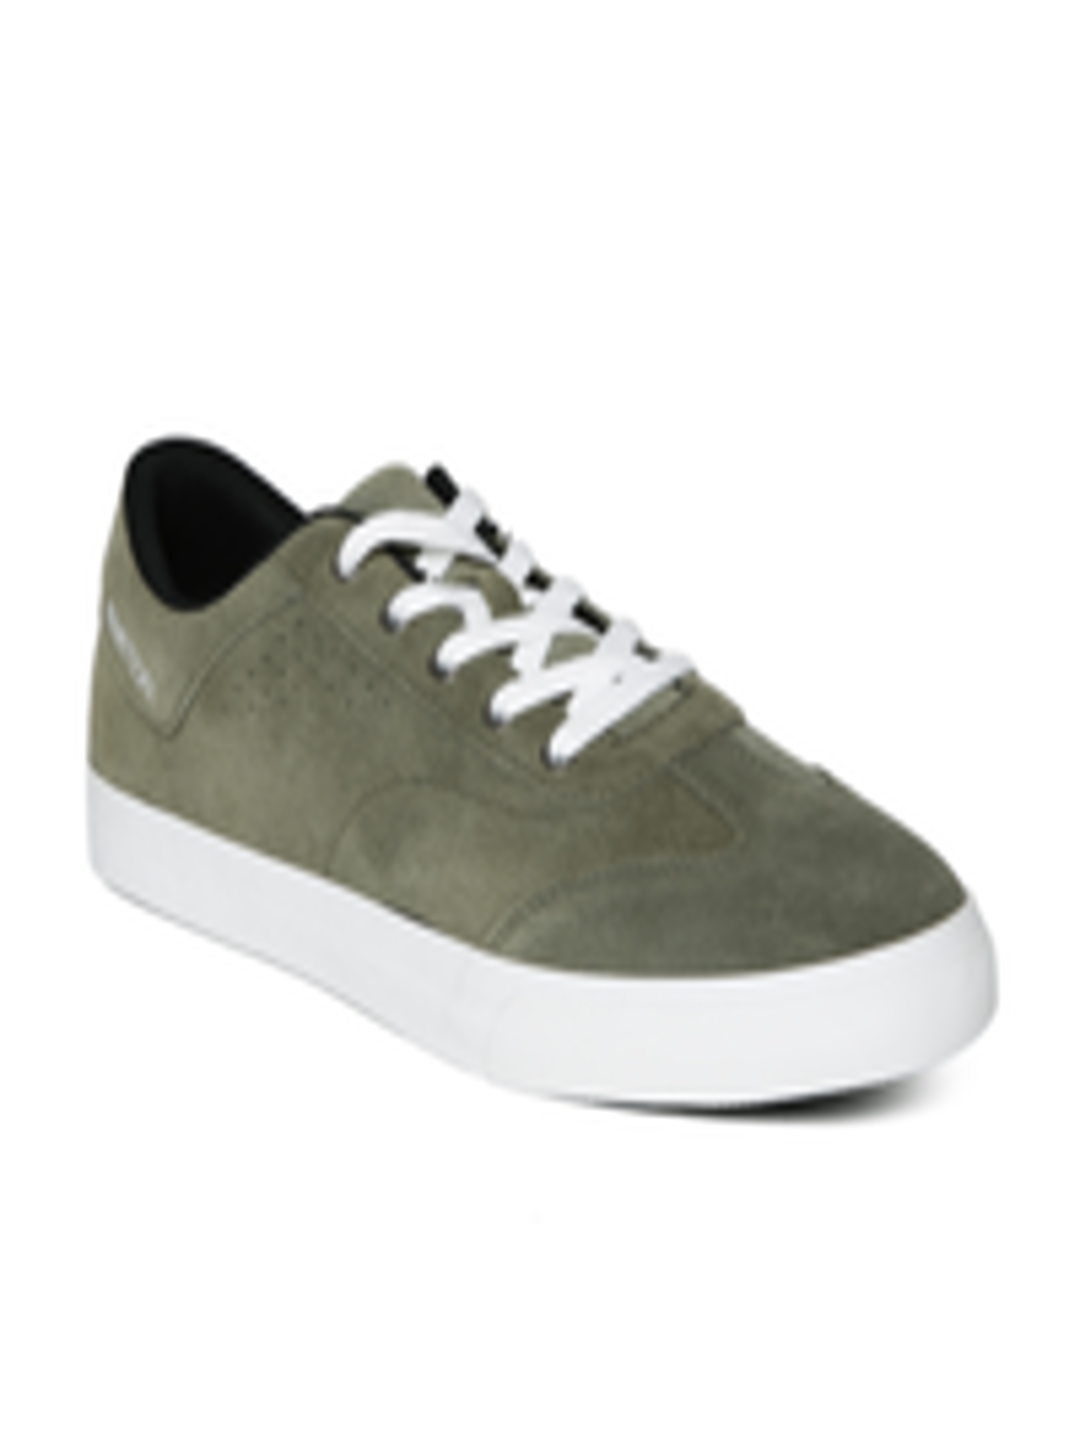 Buy United Colors Of Benetton Men Olive Green Suede Sneakers - Casual ...